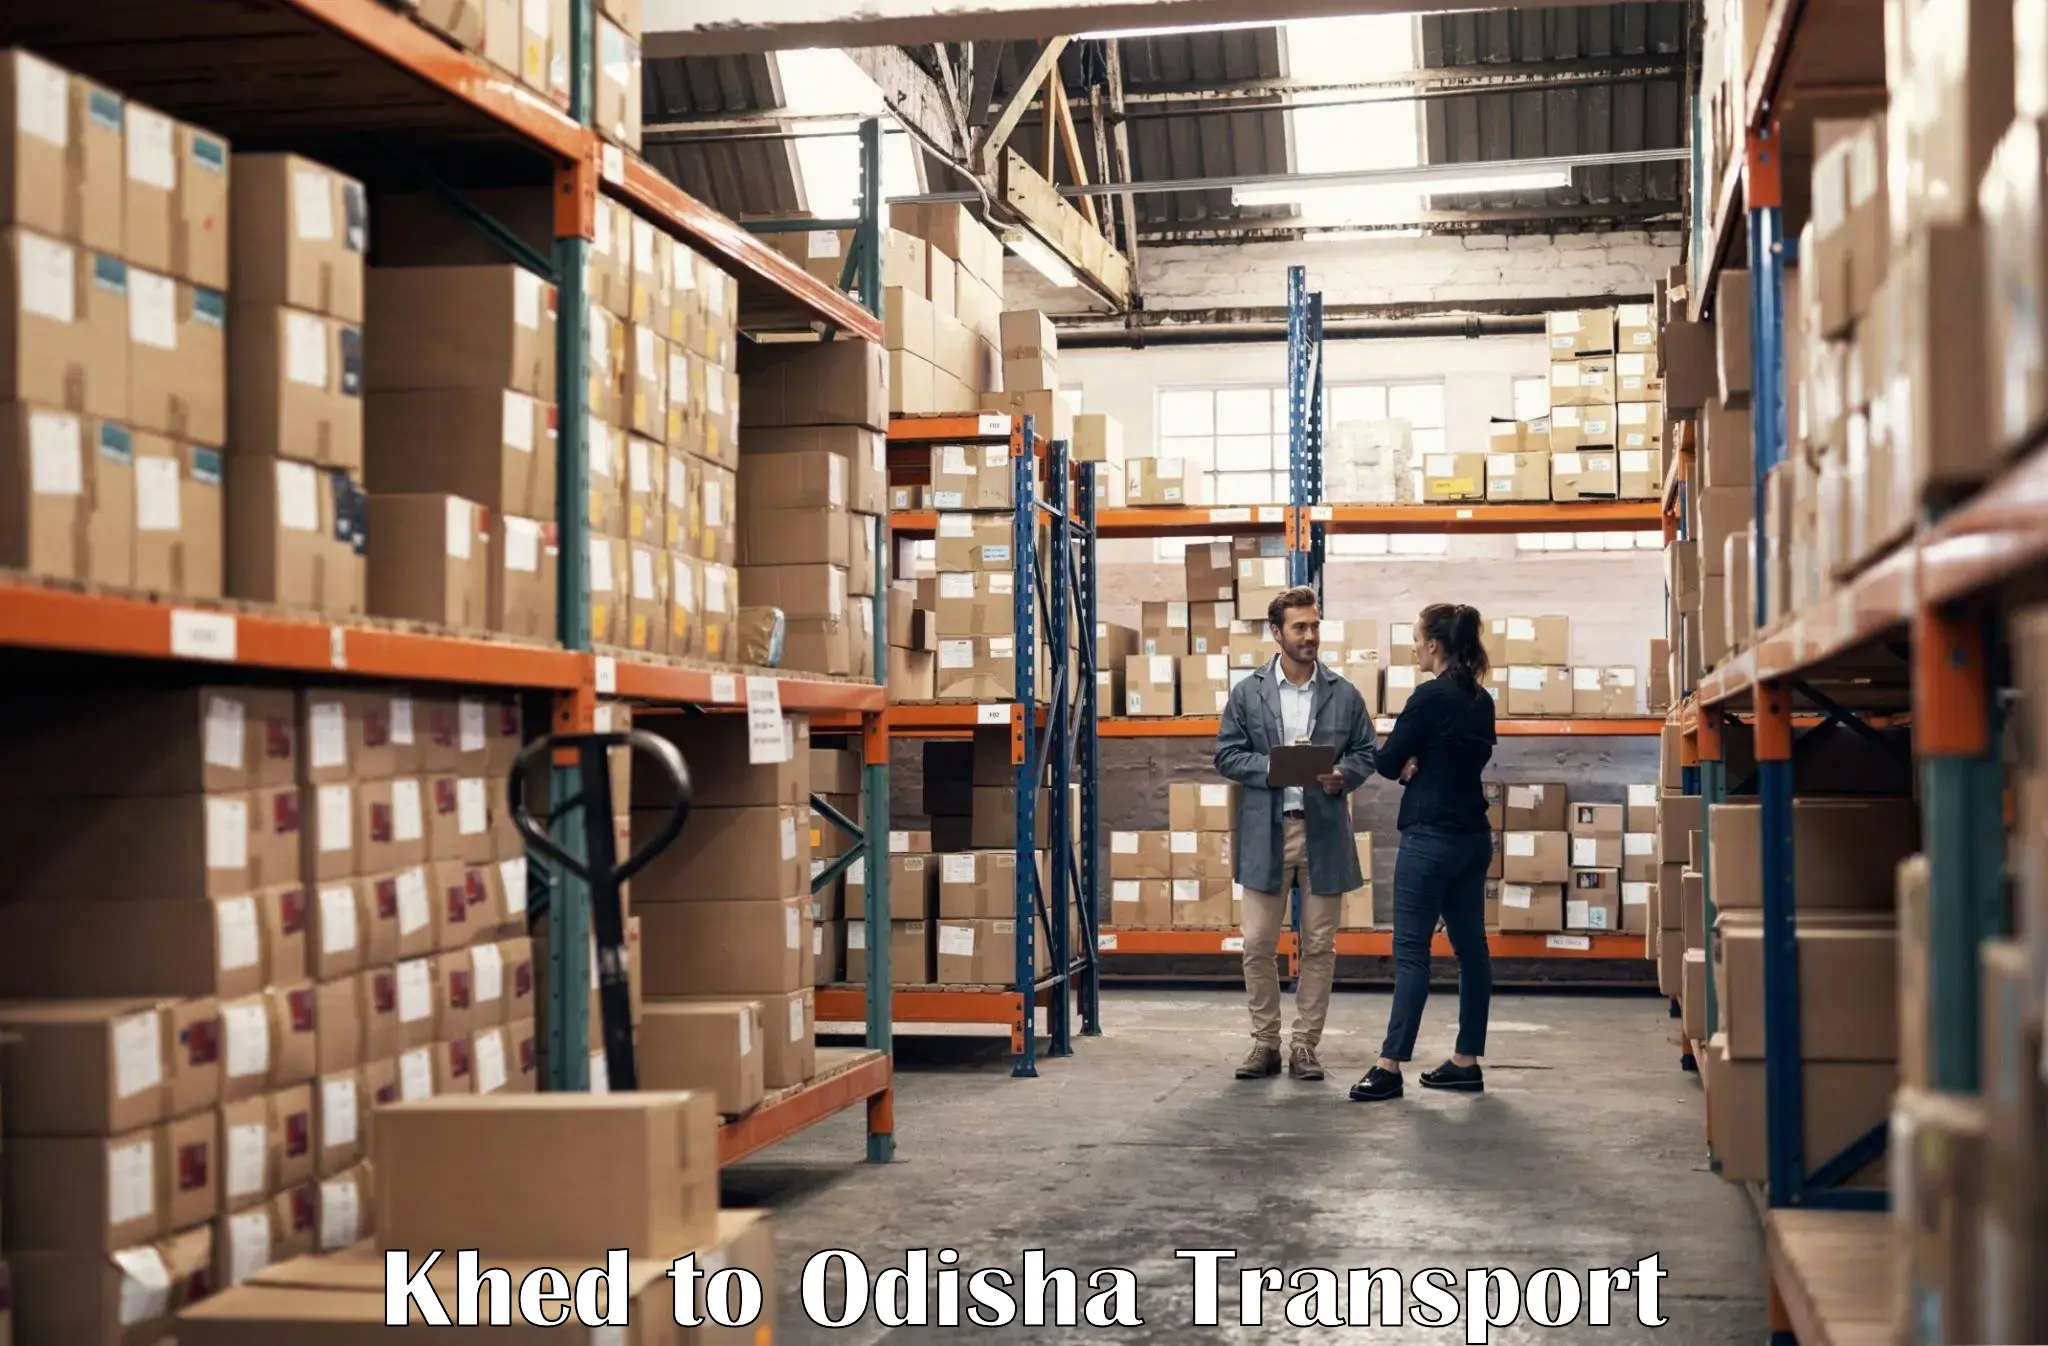 Truck transport companies in India Khed to Khordha